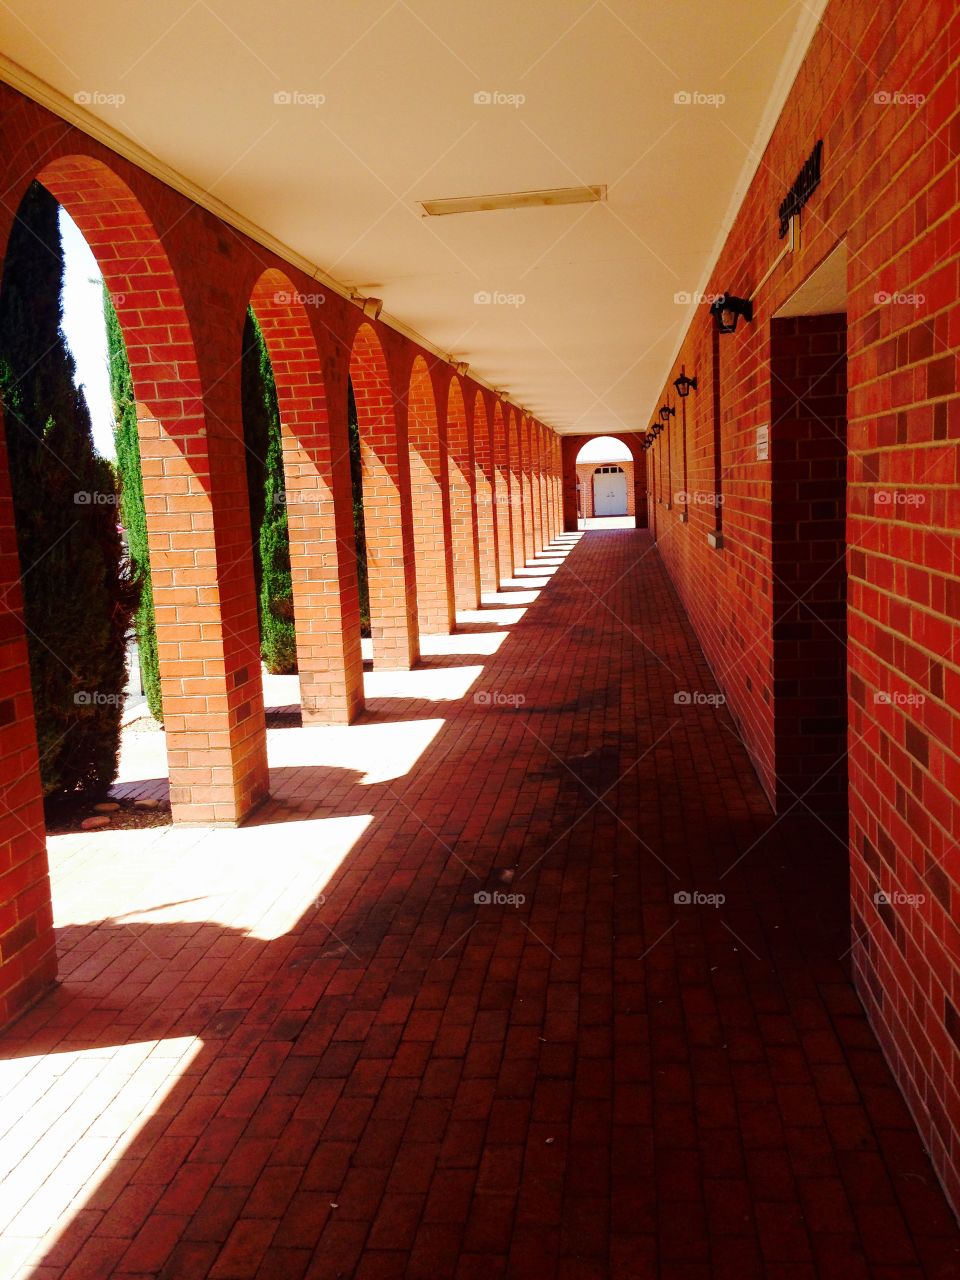 Perspective. Walkway to chuch